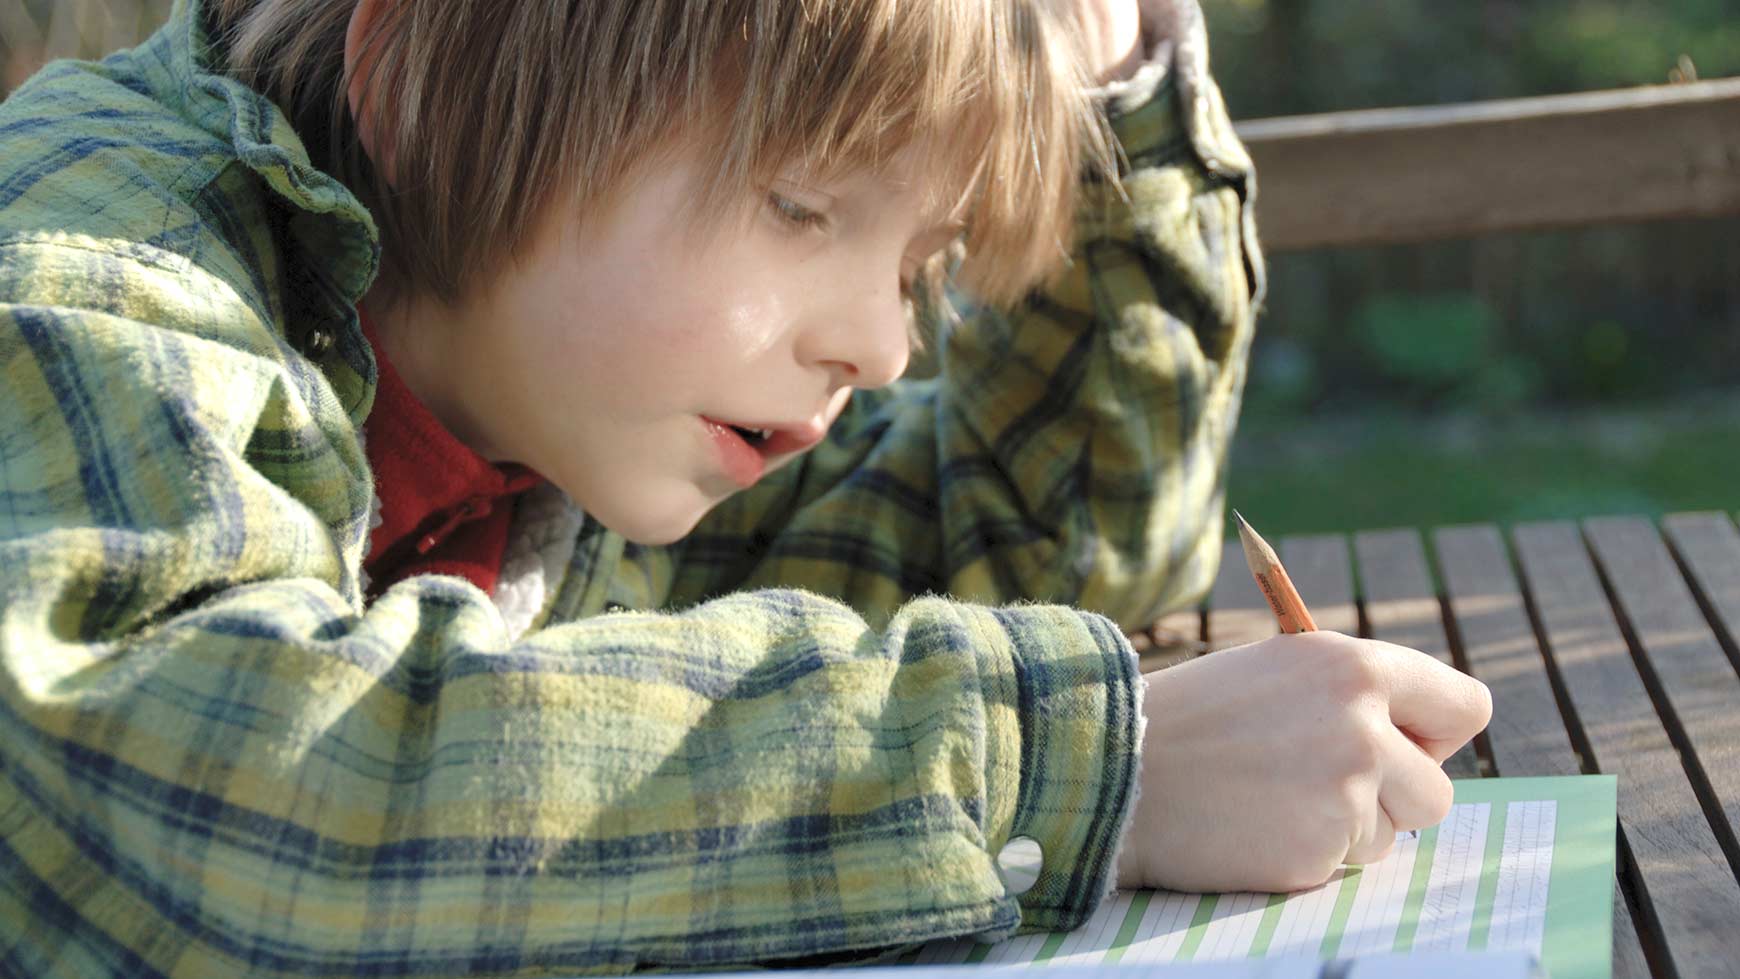 8 Tips To Help Your Child With Dysgraphia